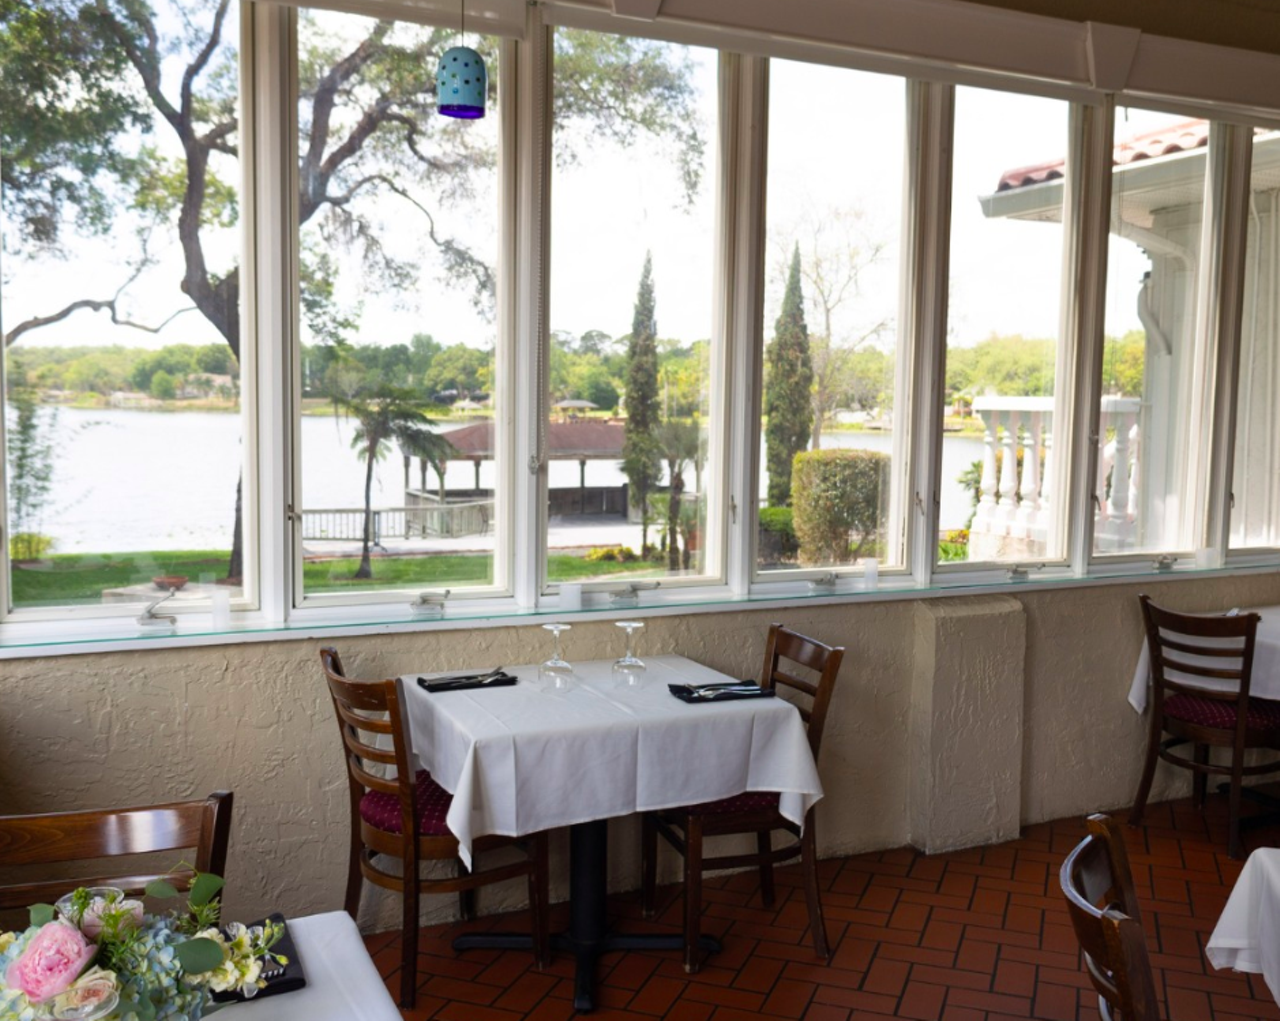 Enzo's on the Lake
1130 S. U.S. Highway 17-92, Longwood
Enzo’s on the Lake got its start in a humble Central Florida home in 1980. Over the years, the restaurant has become the area's go-to romantic date destination par excellence, serving Italian cuisine with a chic spin.